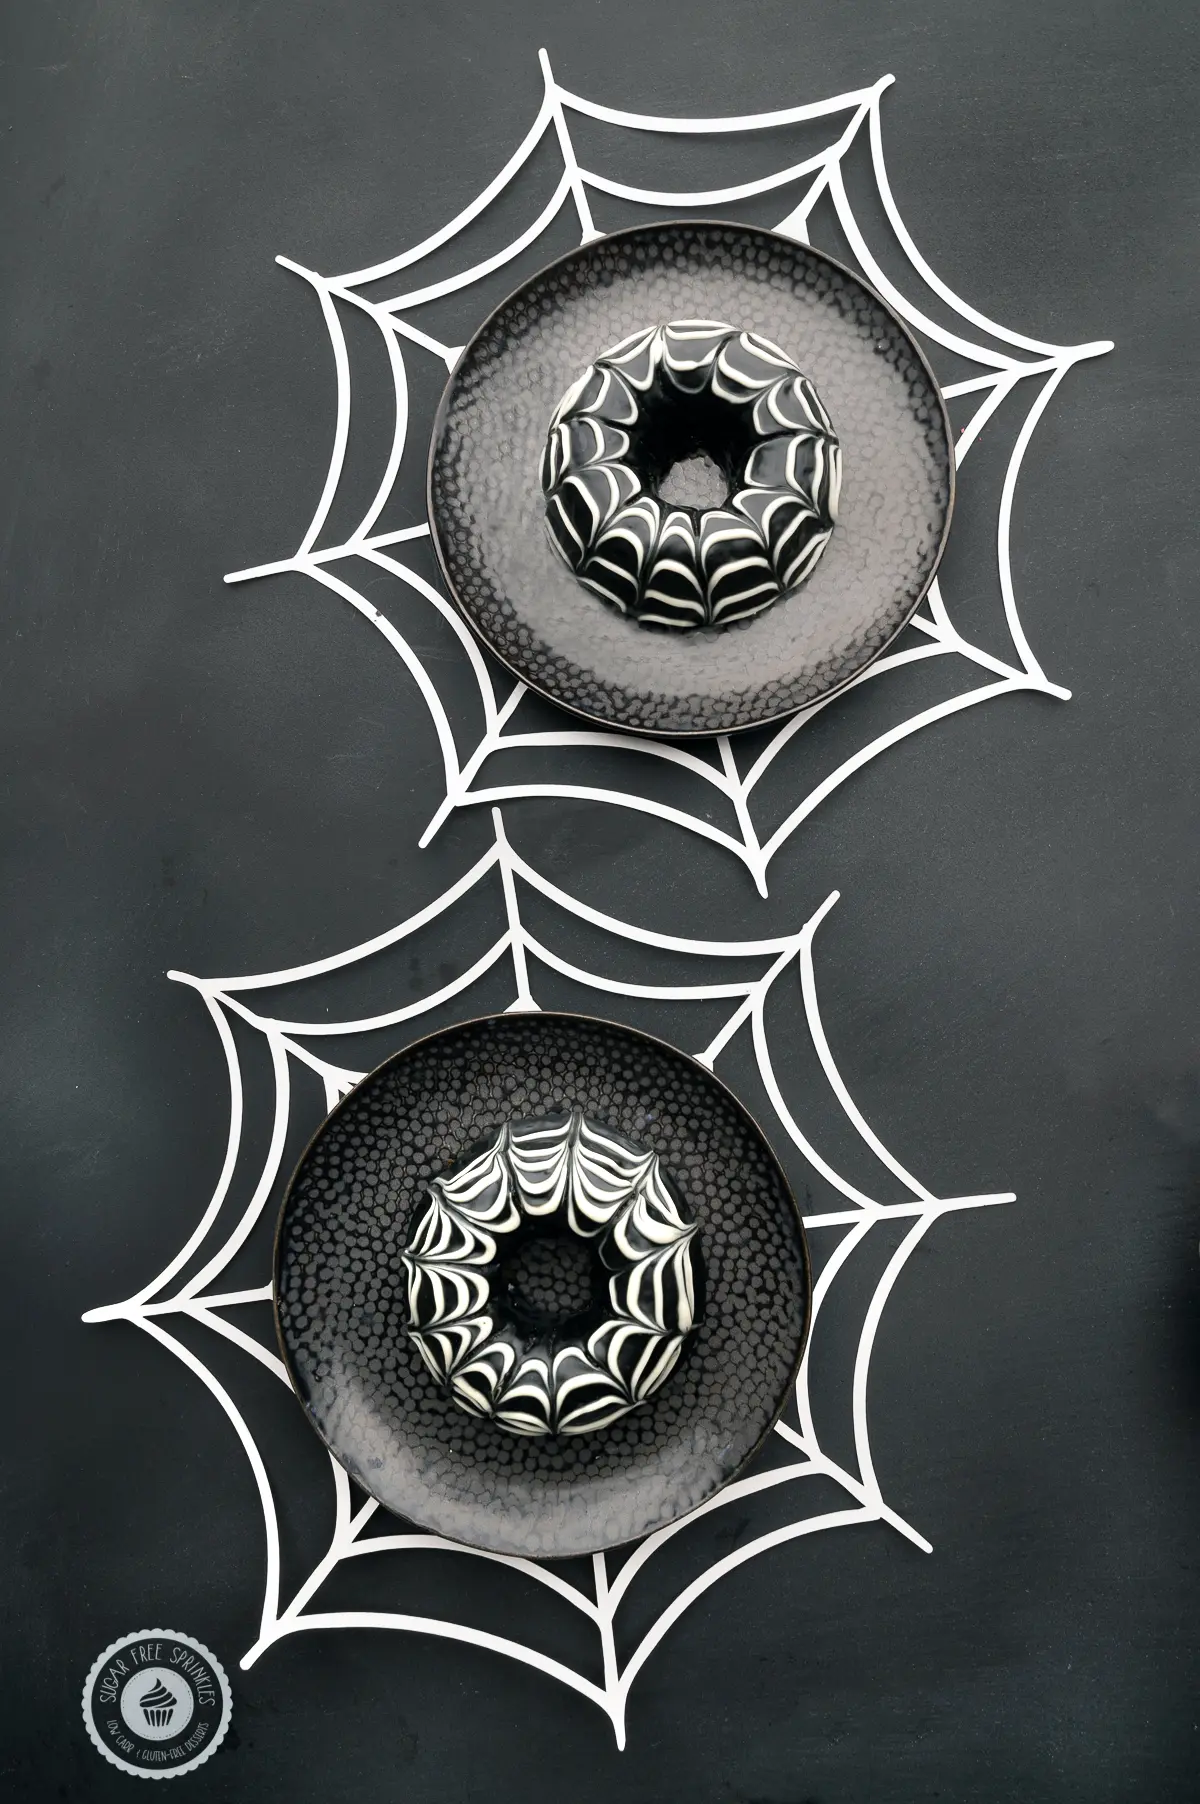 Chocolate glazed keto donuts with a spider web design on dark black plates with white paper spider webs 